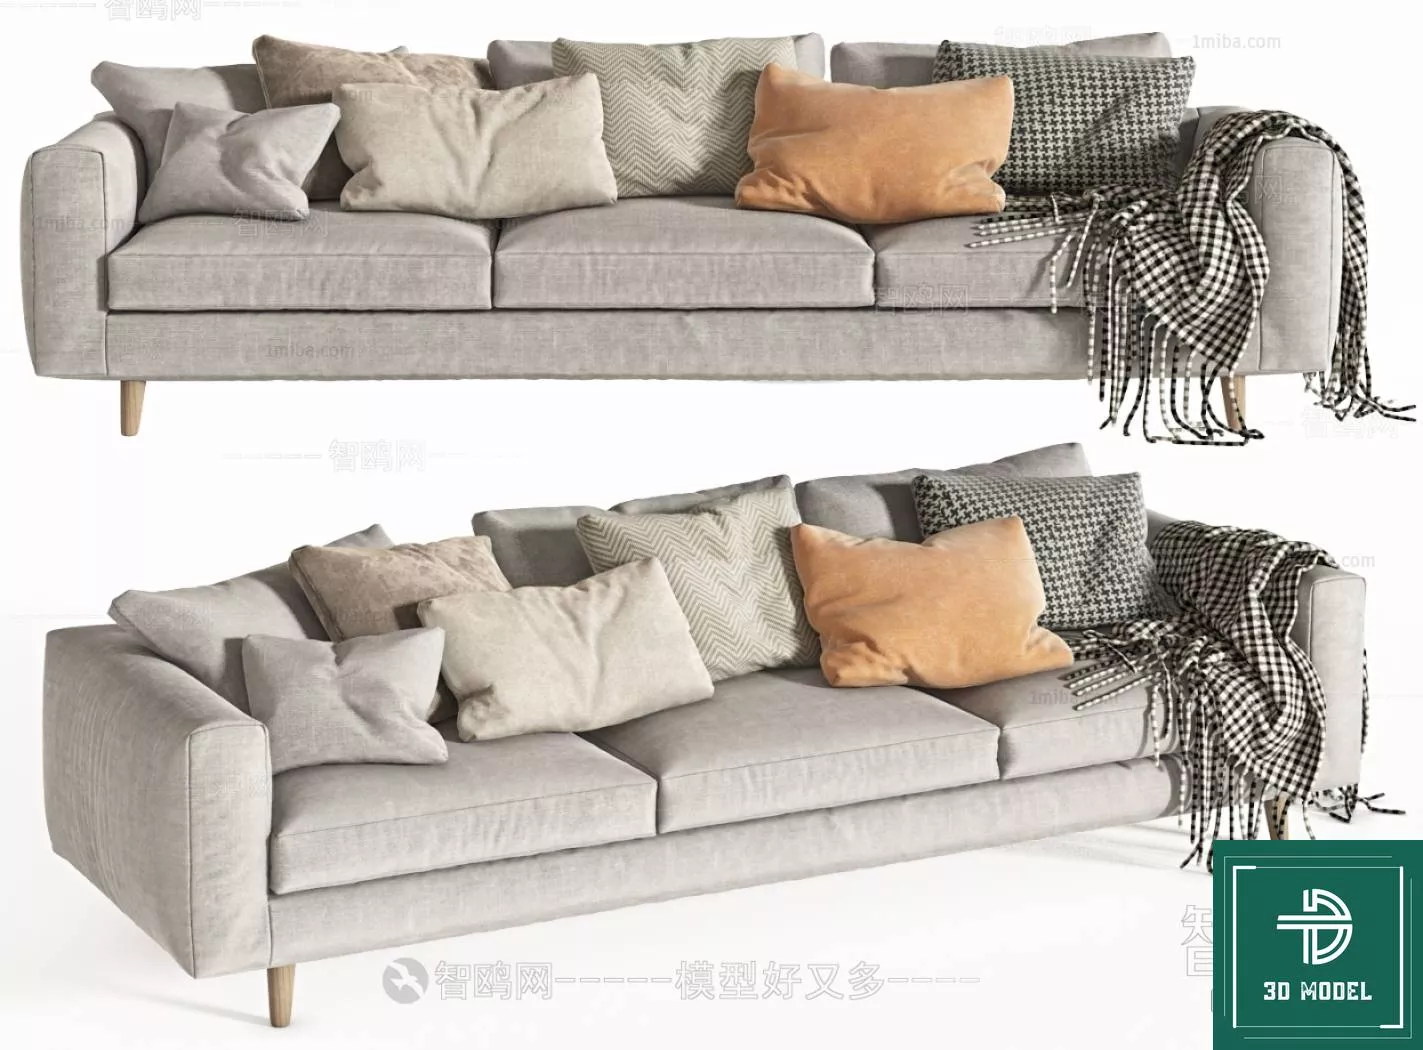 MODERN SOFA - SKETCHUP 3D MODEL - VRAY OR ENSCAPE - ID13365